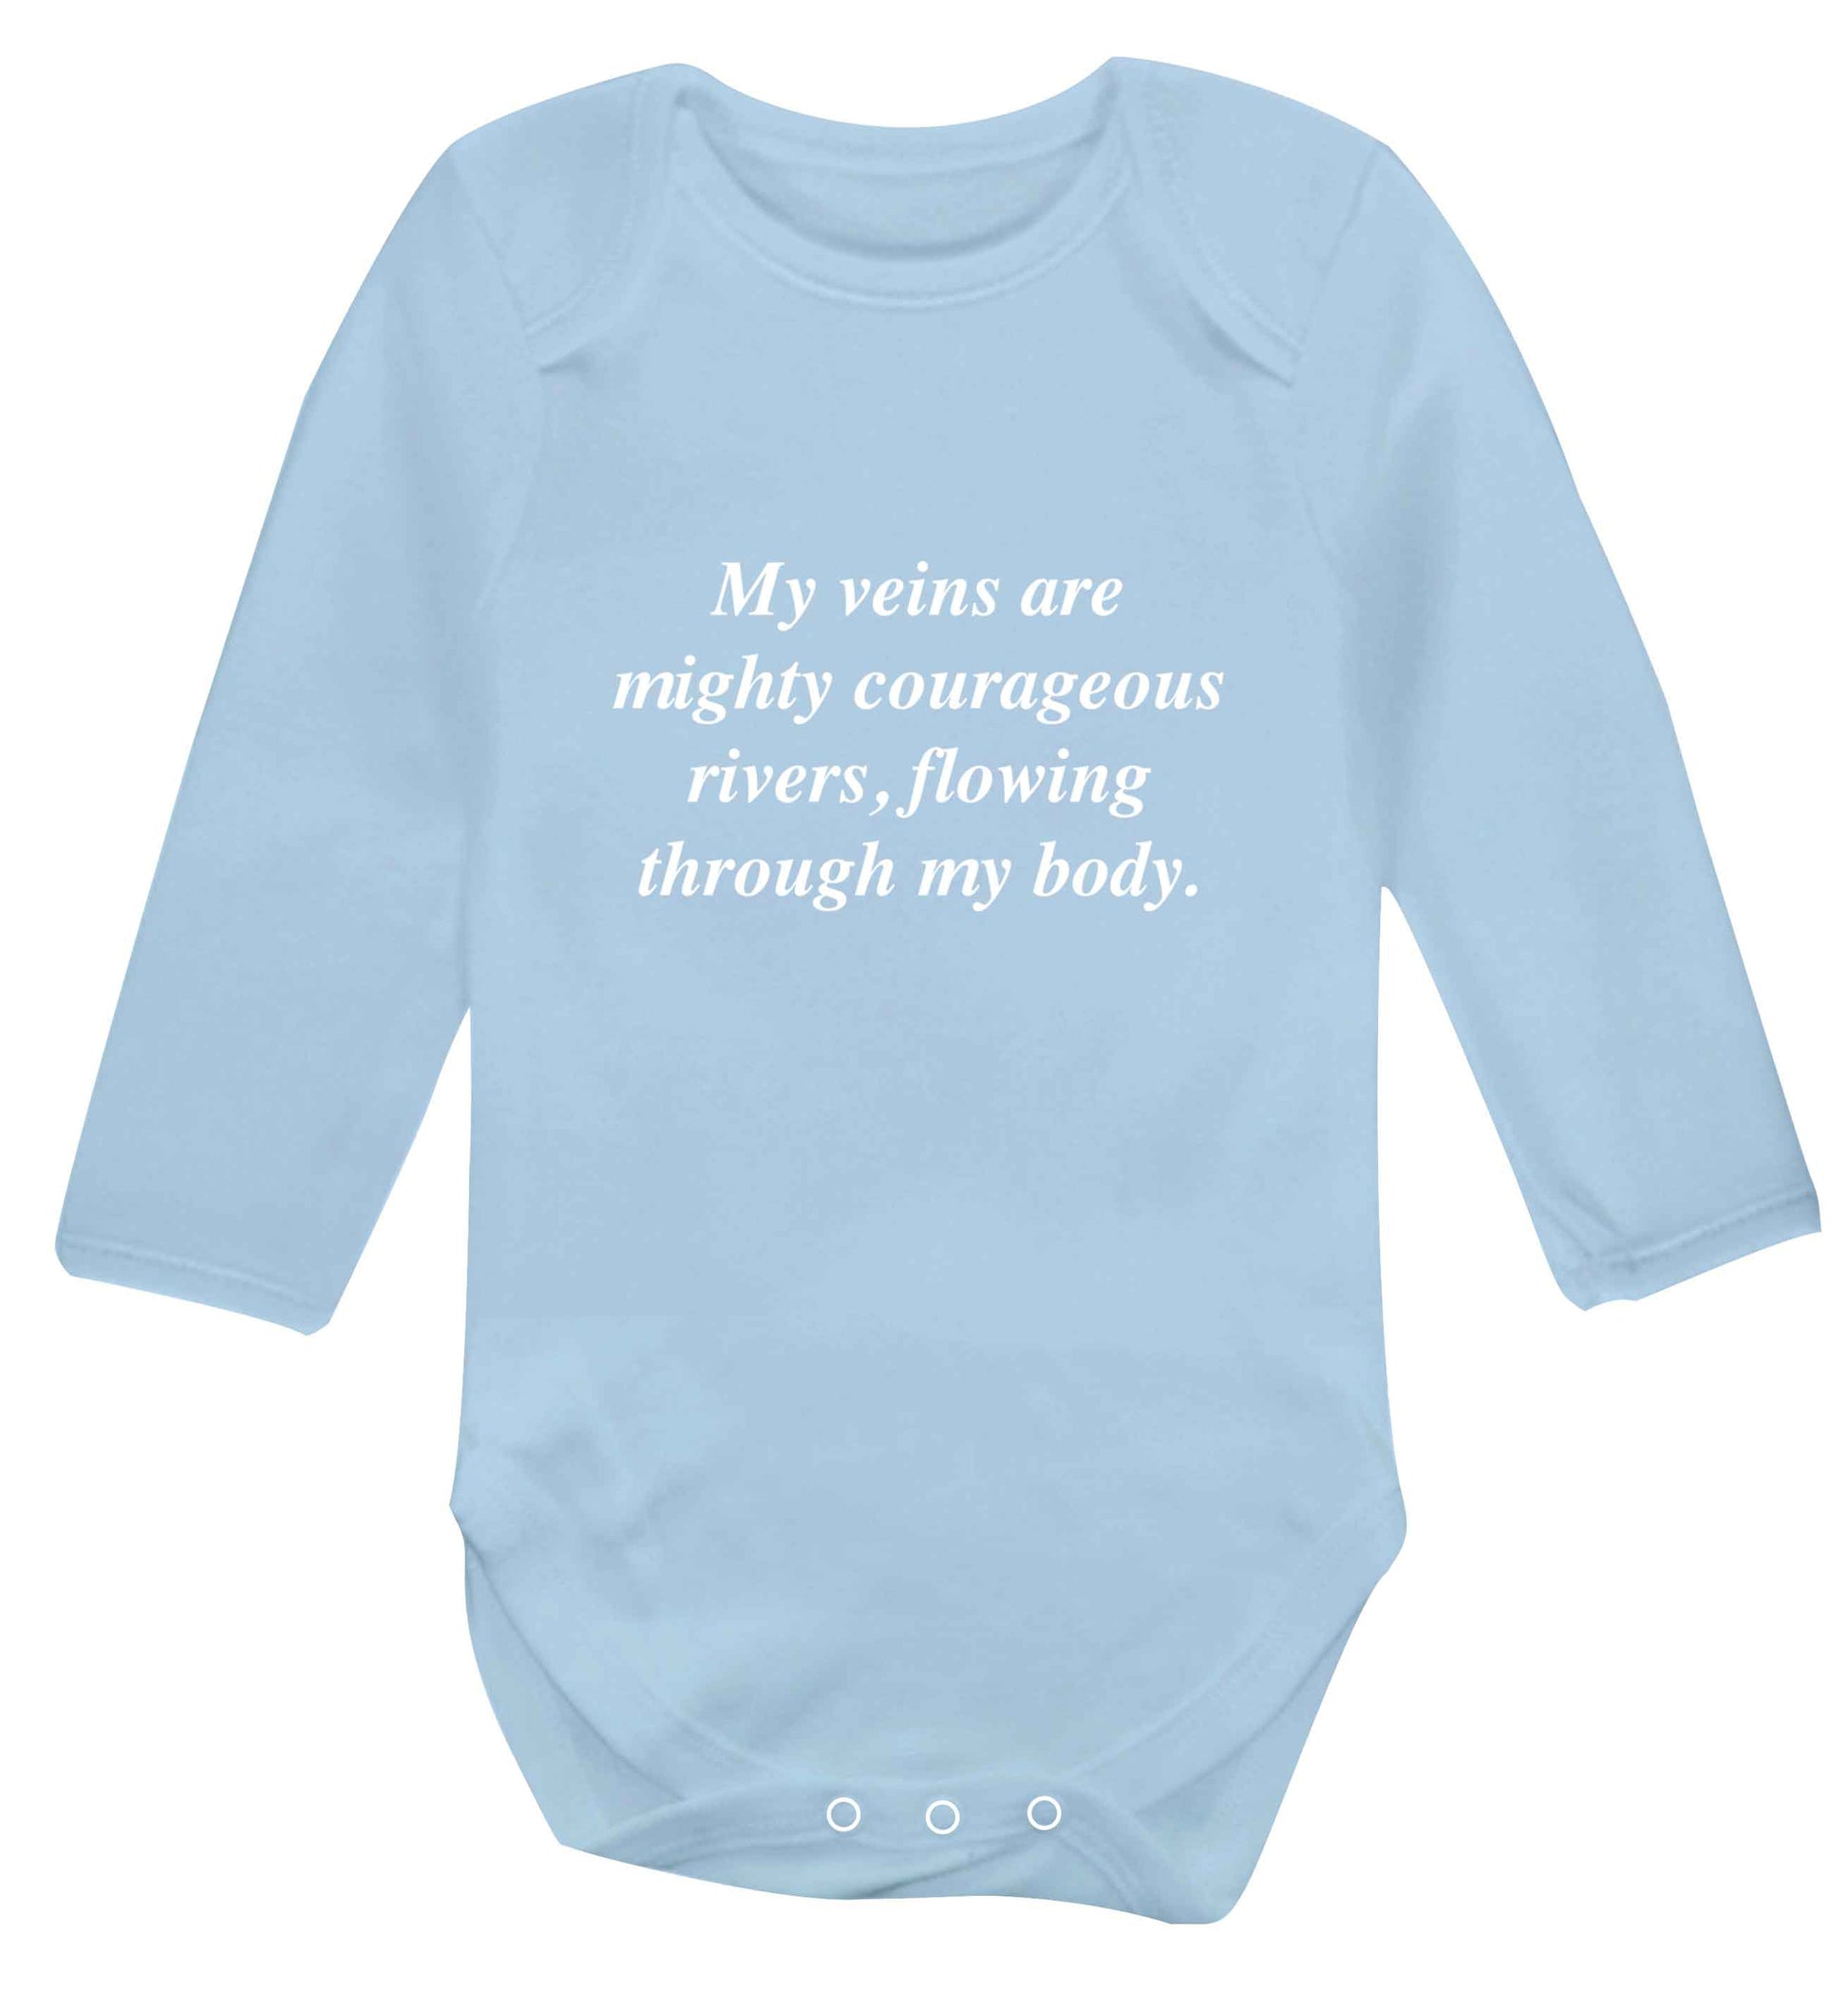 My veins are mighty courageous rivers, flowing through my body baby vest long sleeved pale blue 6-12 months